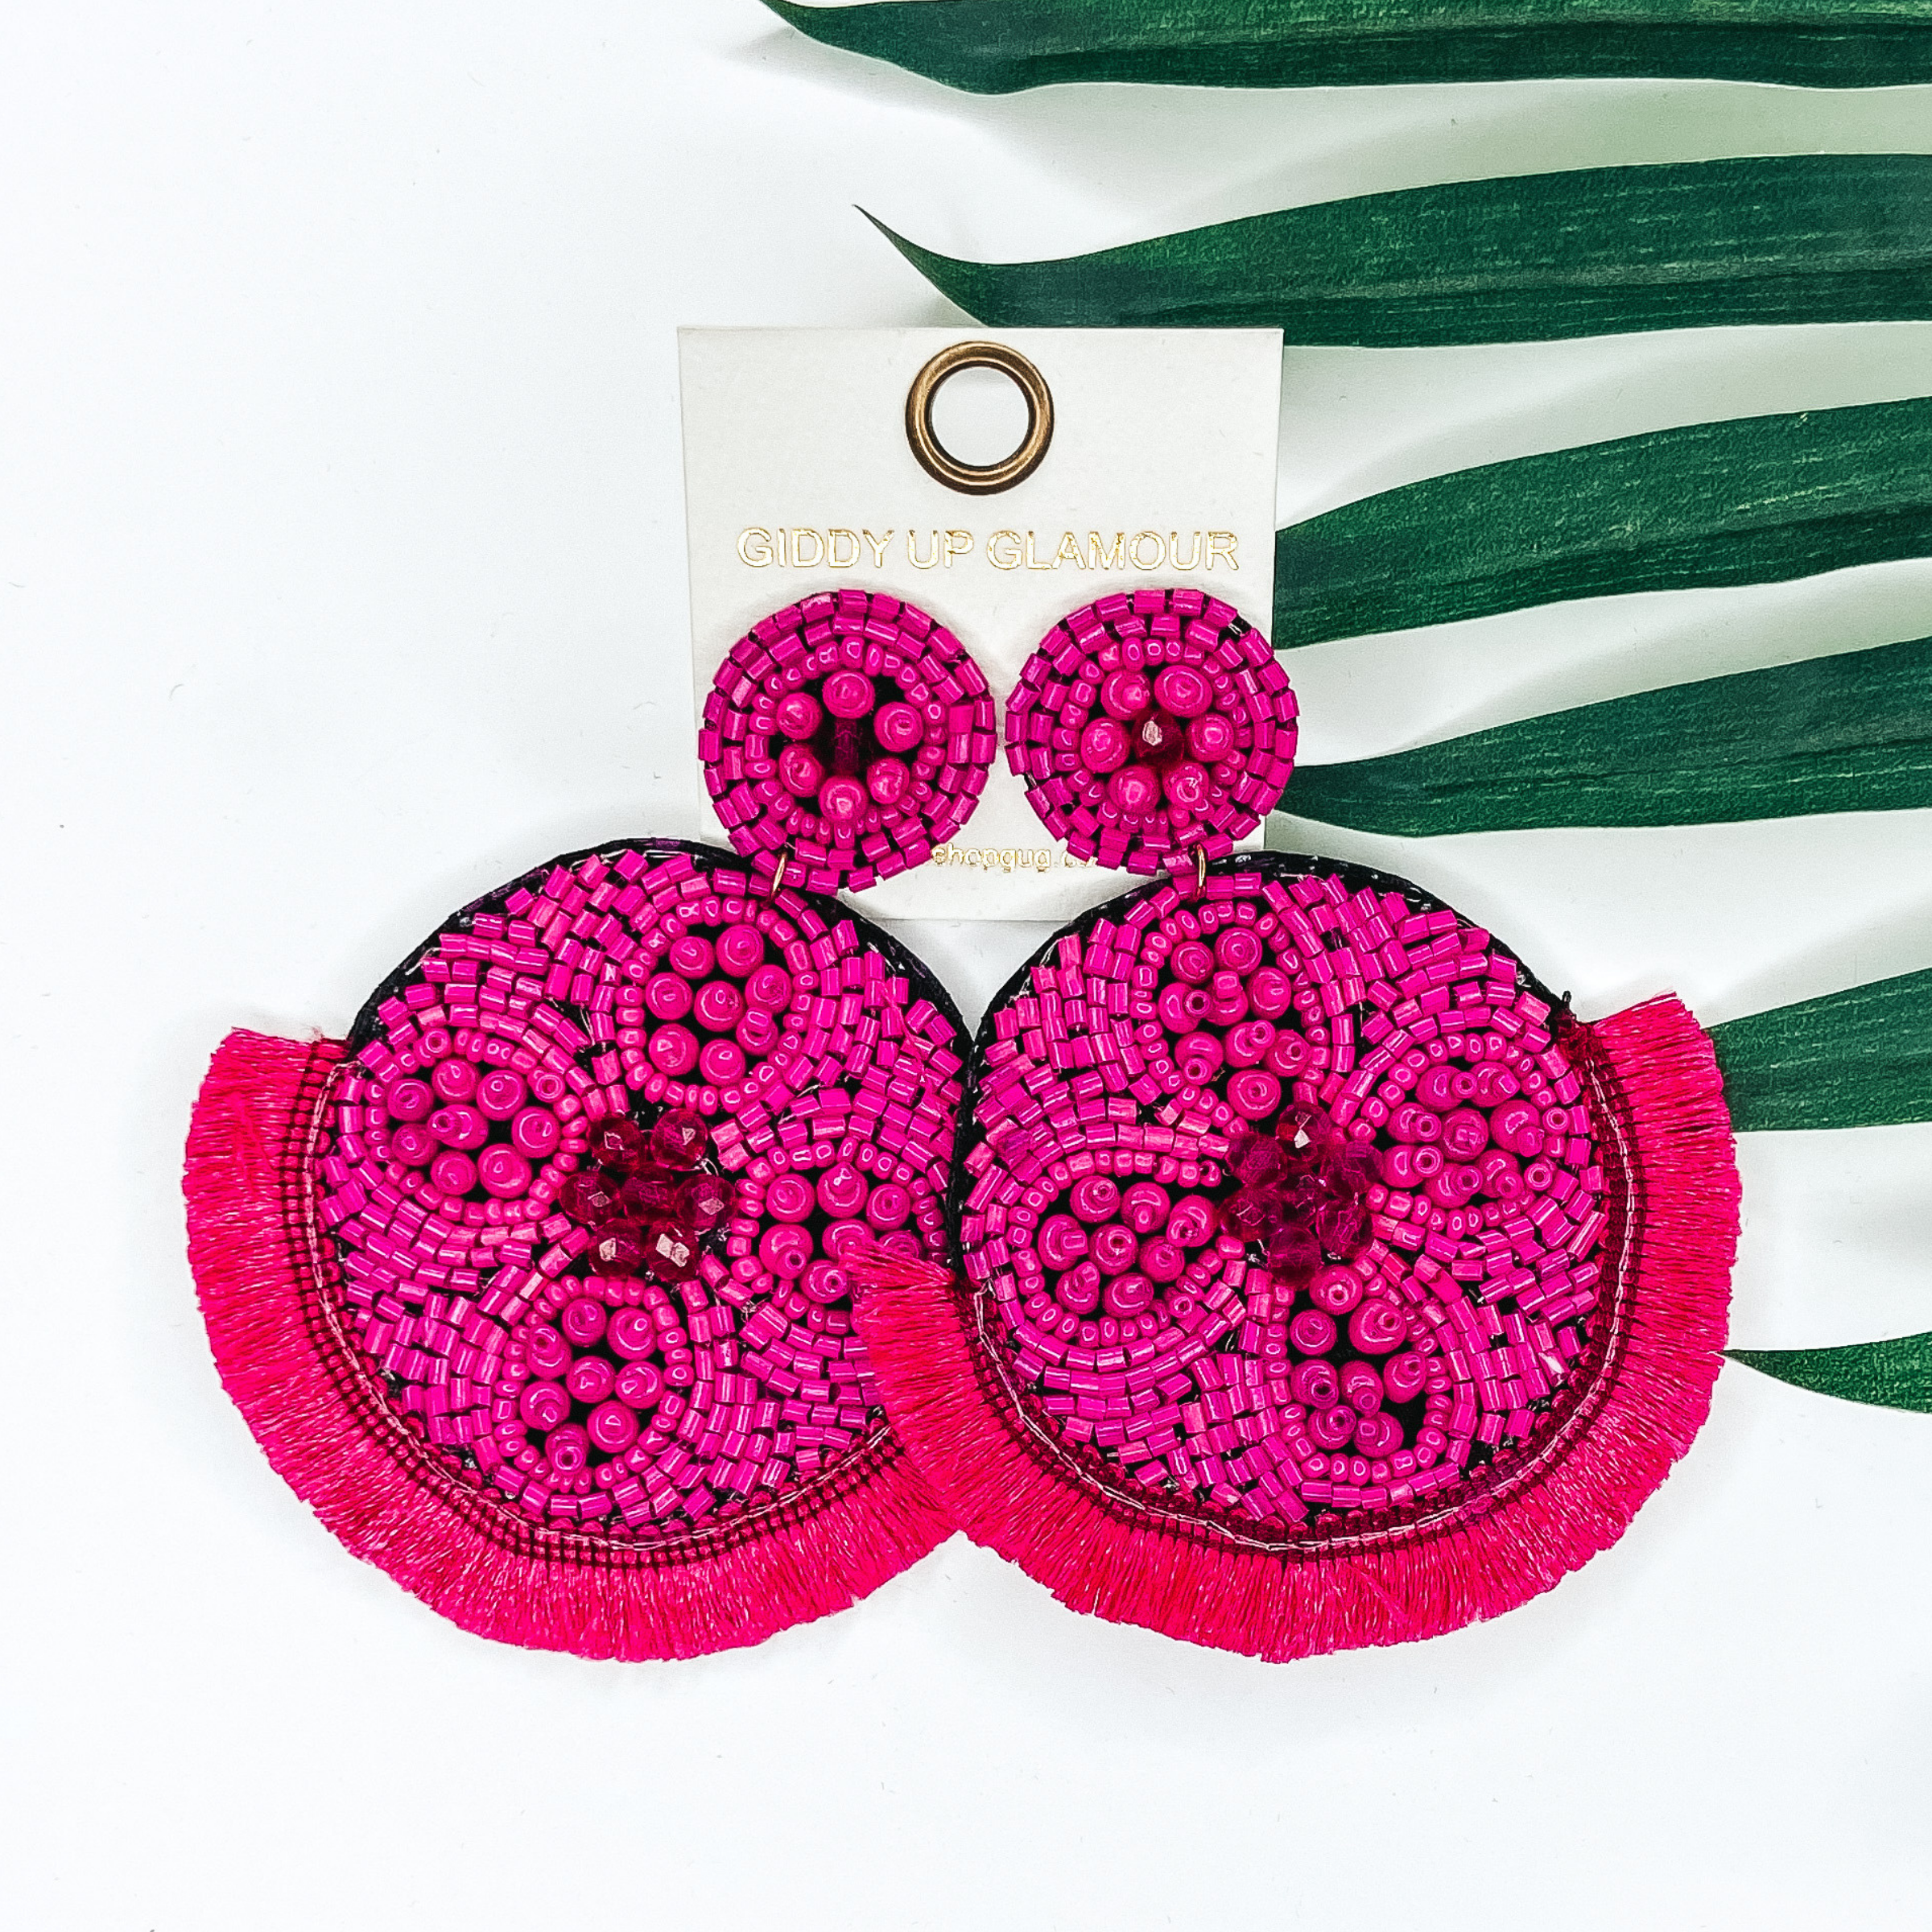 Fuchsia beaded circle post back earrings. Hanging from the earrings are black beaded circle pendant with black fringe. These earrings are pictured on a white background with green leaves behind them.